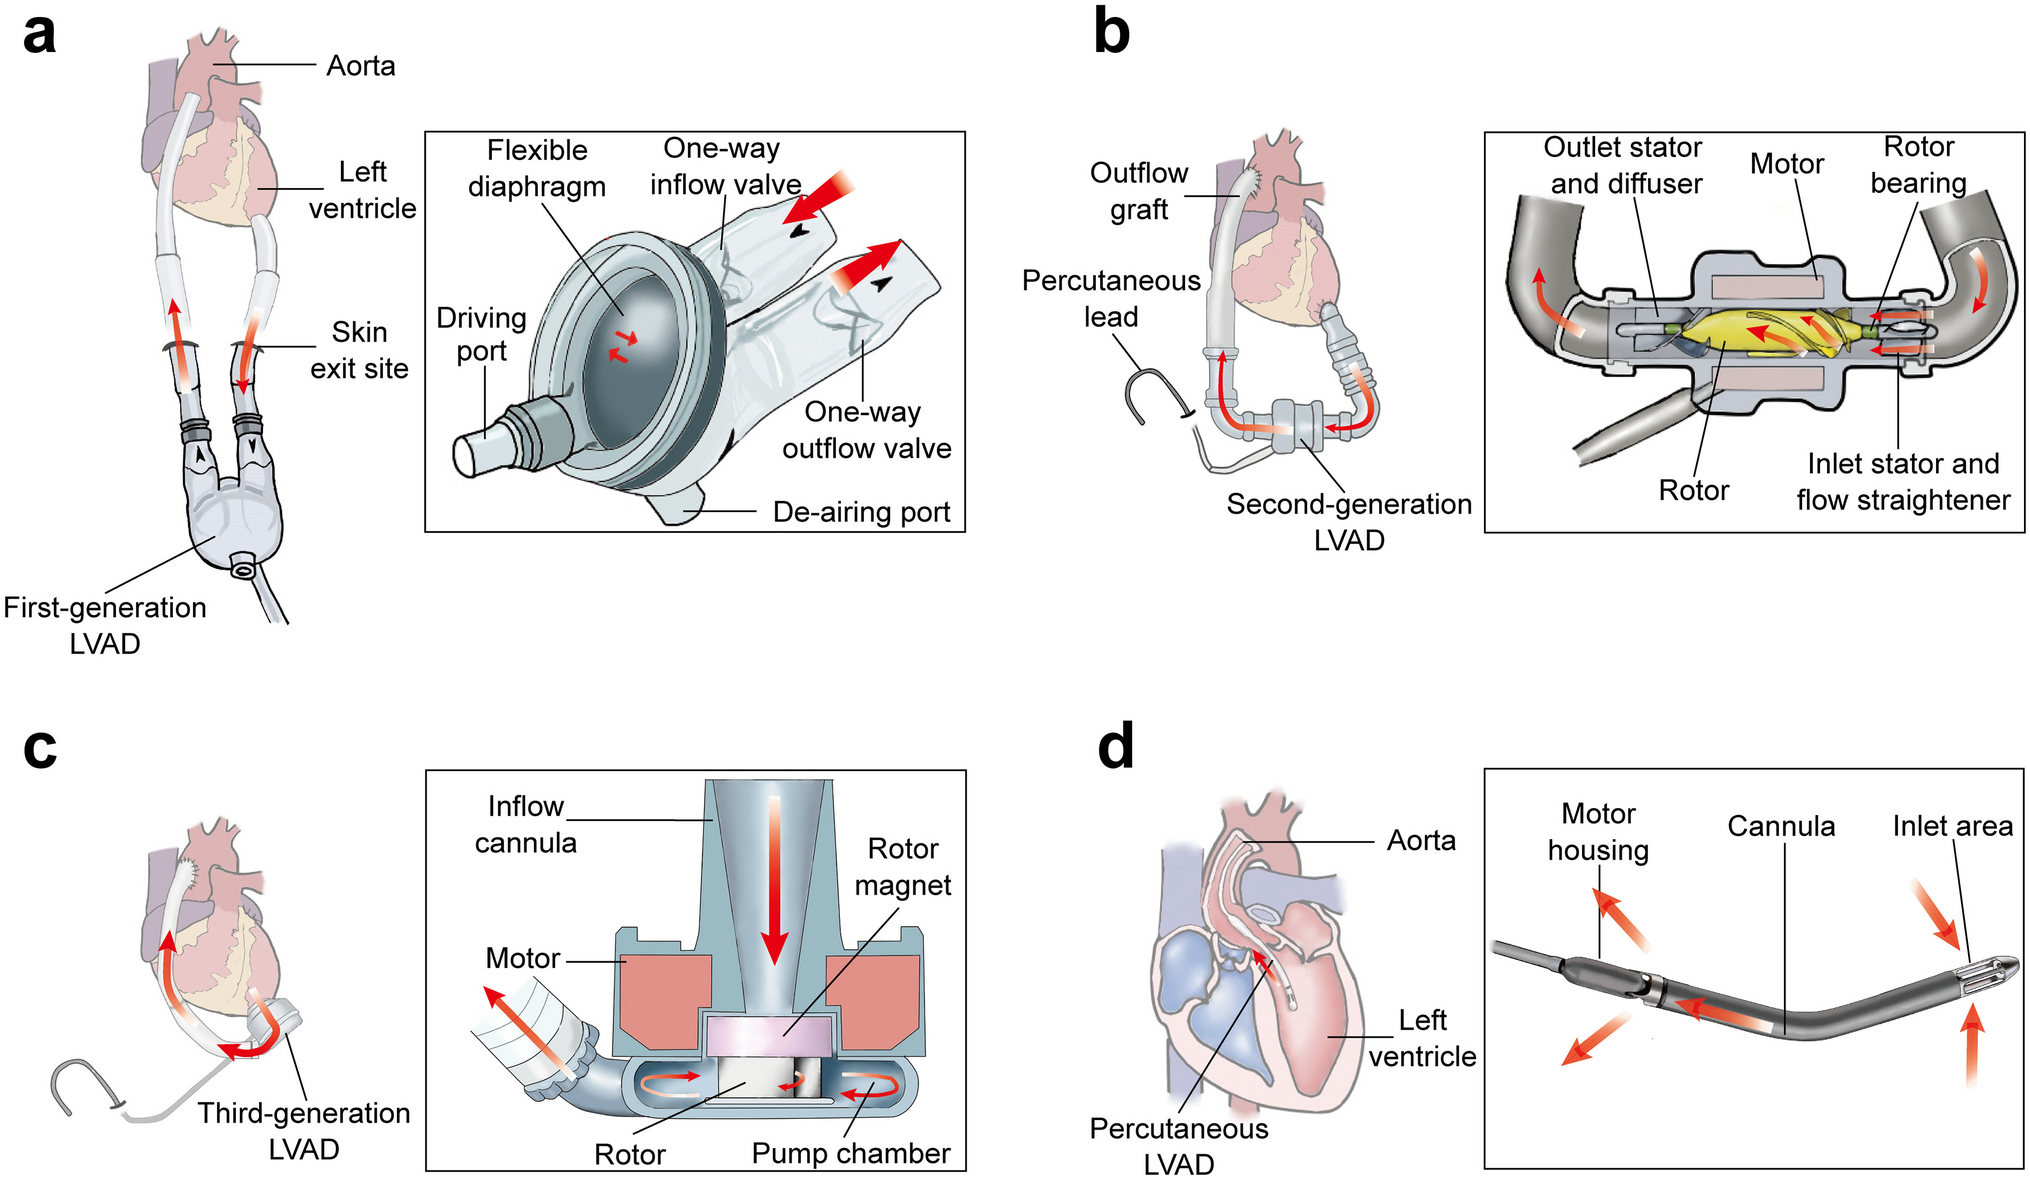 Current status and future directions in pediatric ventricular assist device